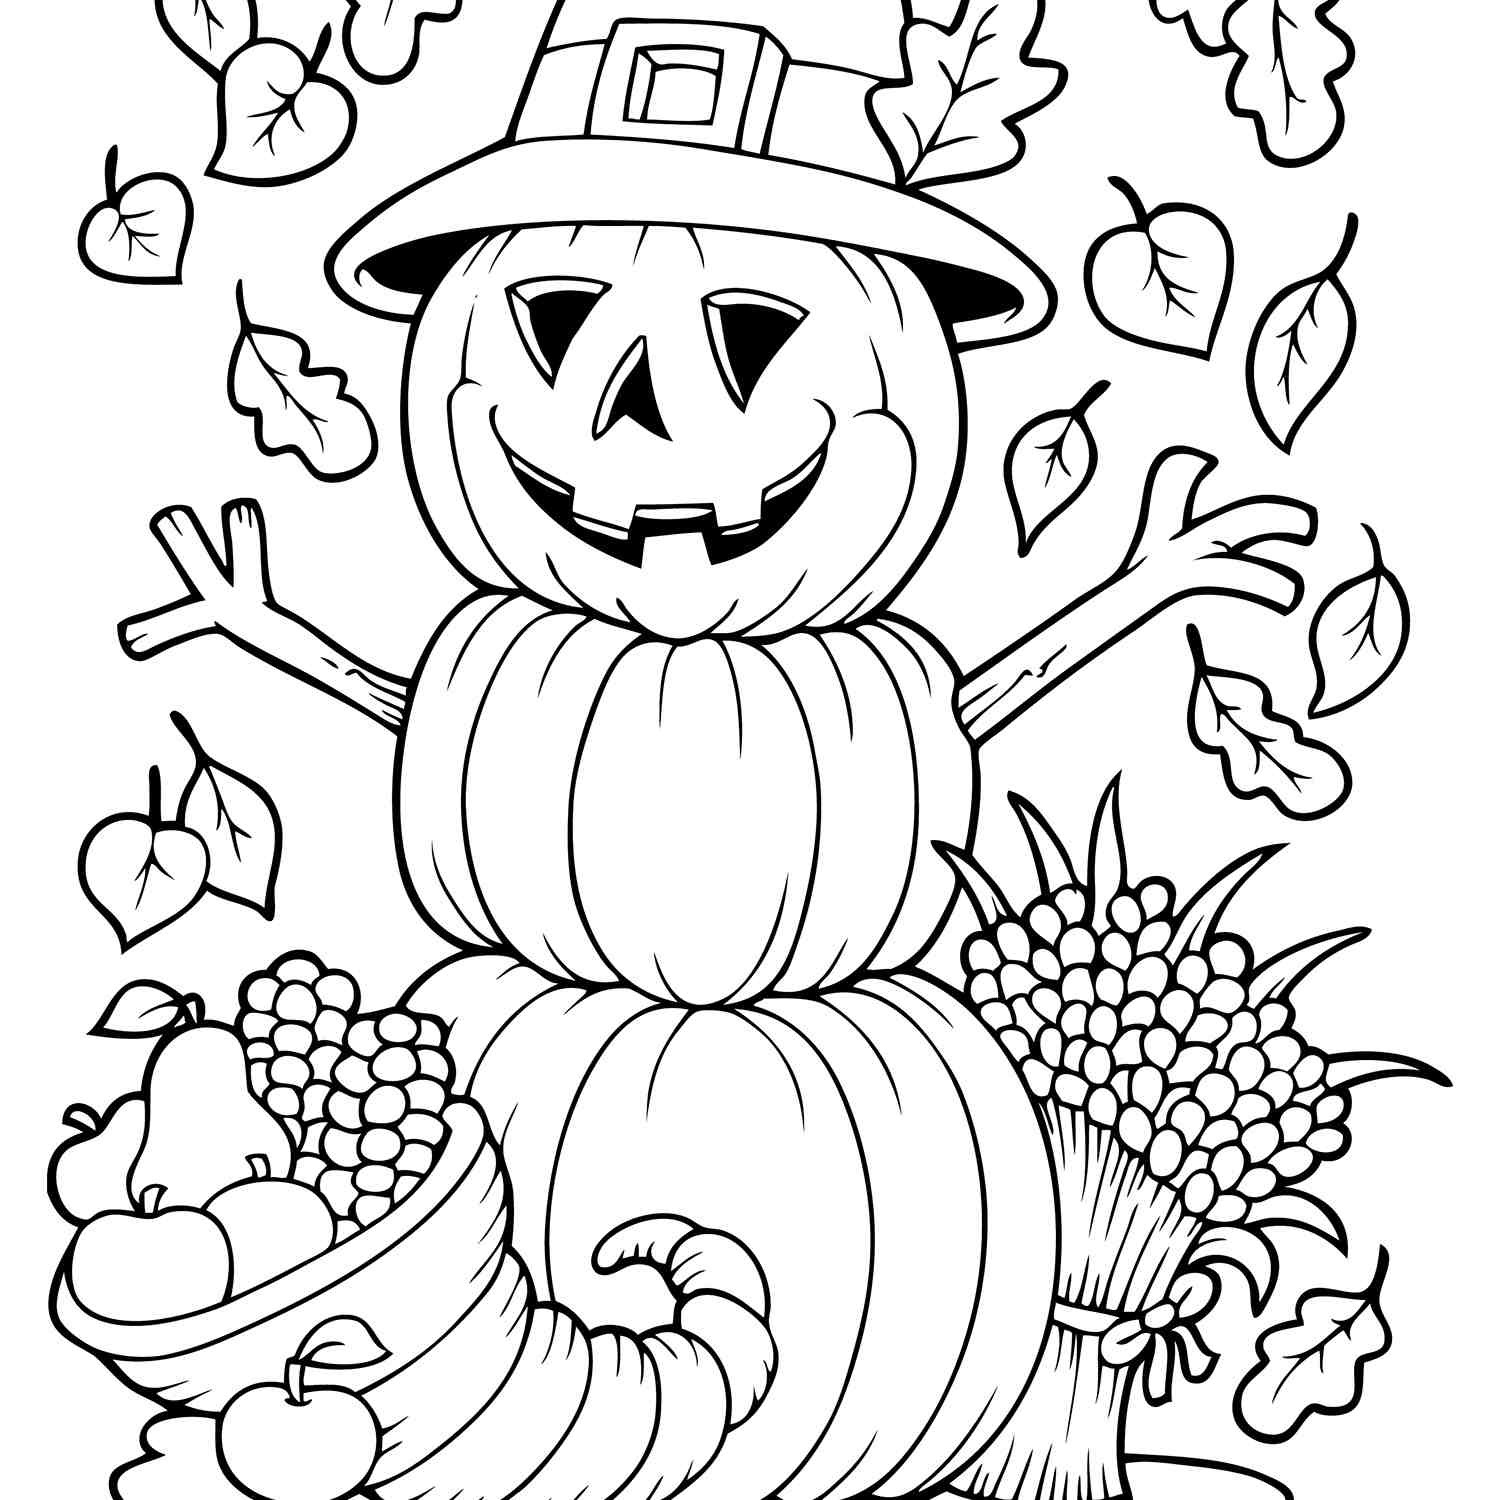 Fall Printables Coloring Pages
 Free Autumn and Fall Coloring Pages